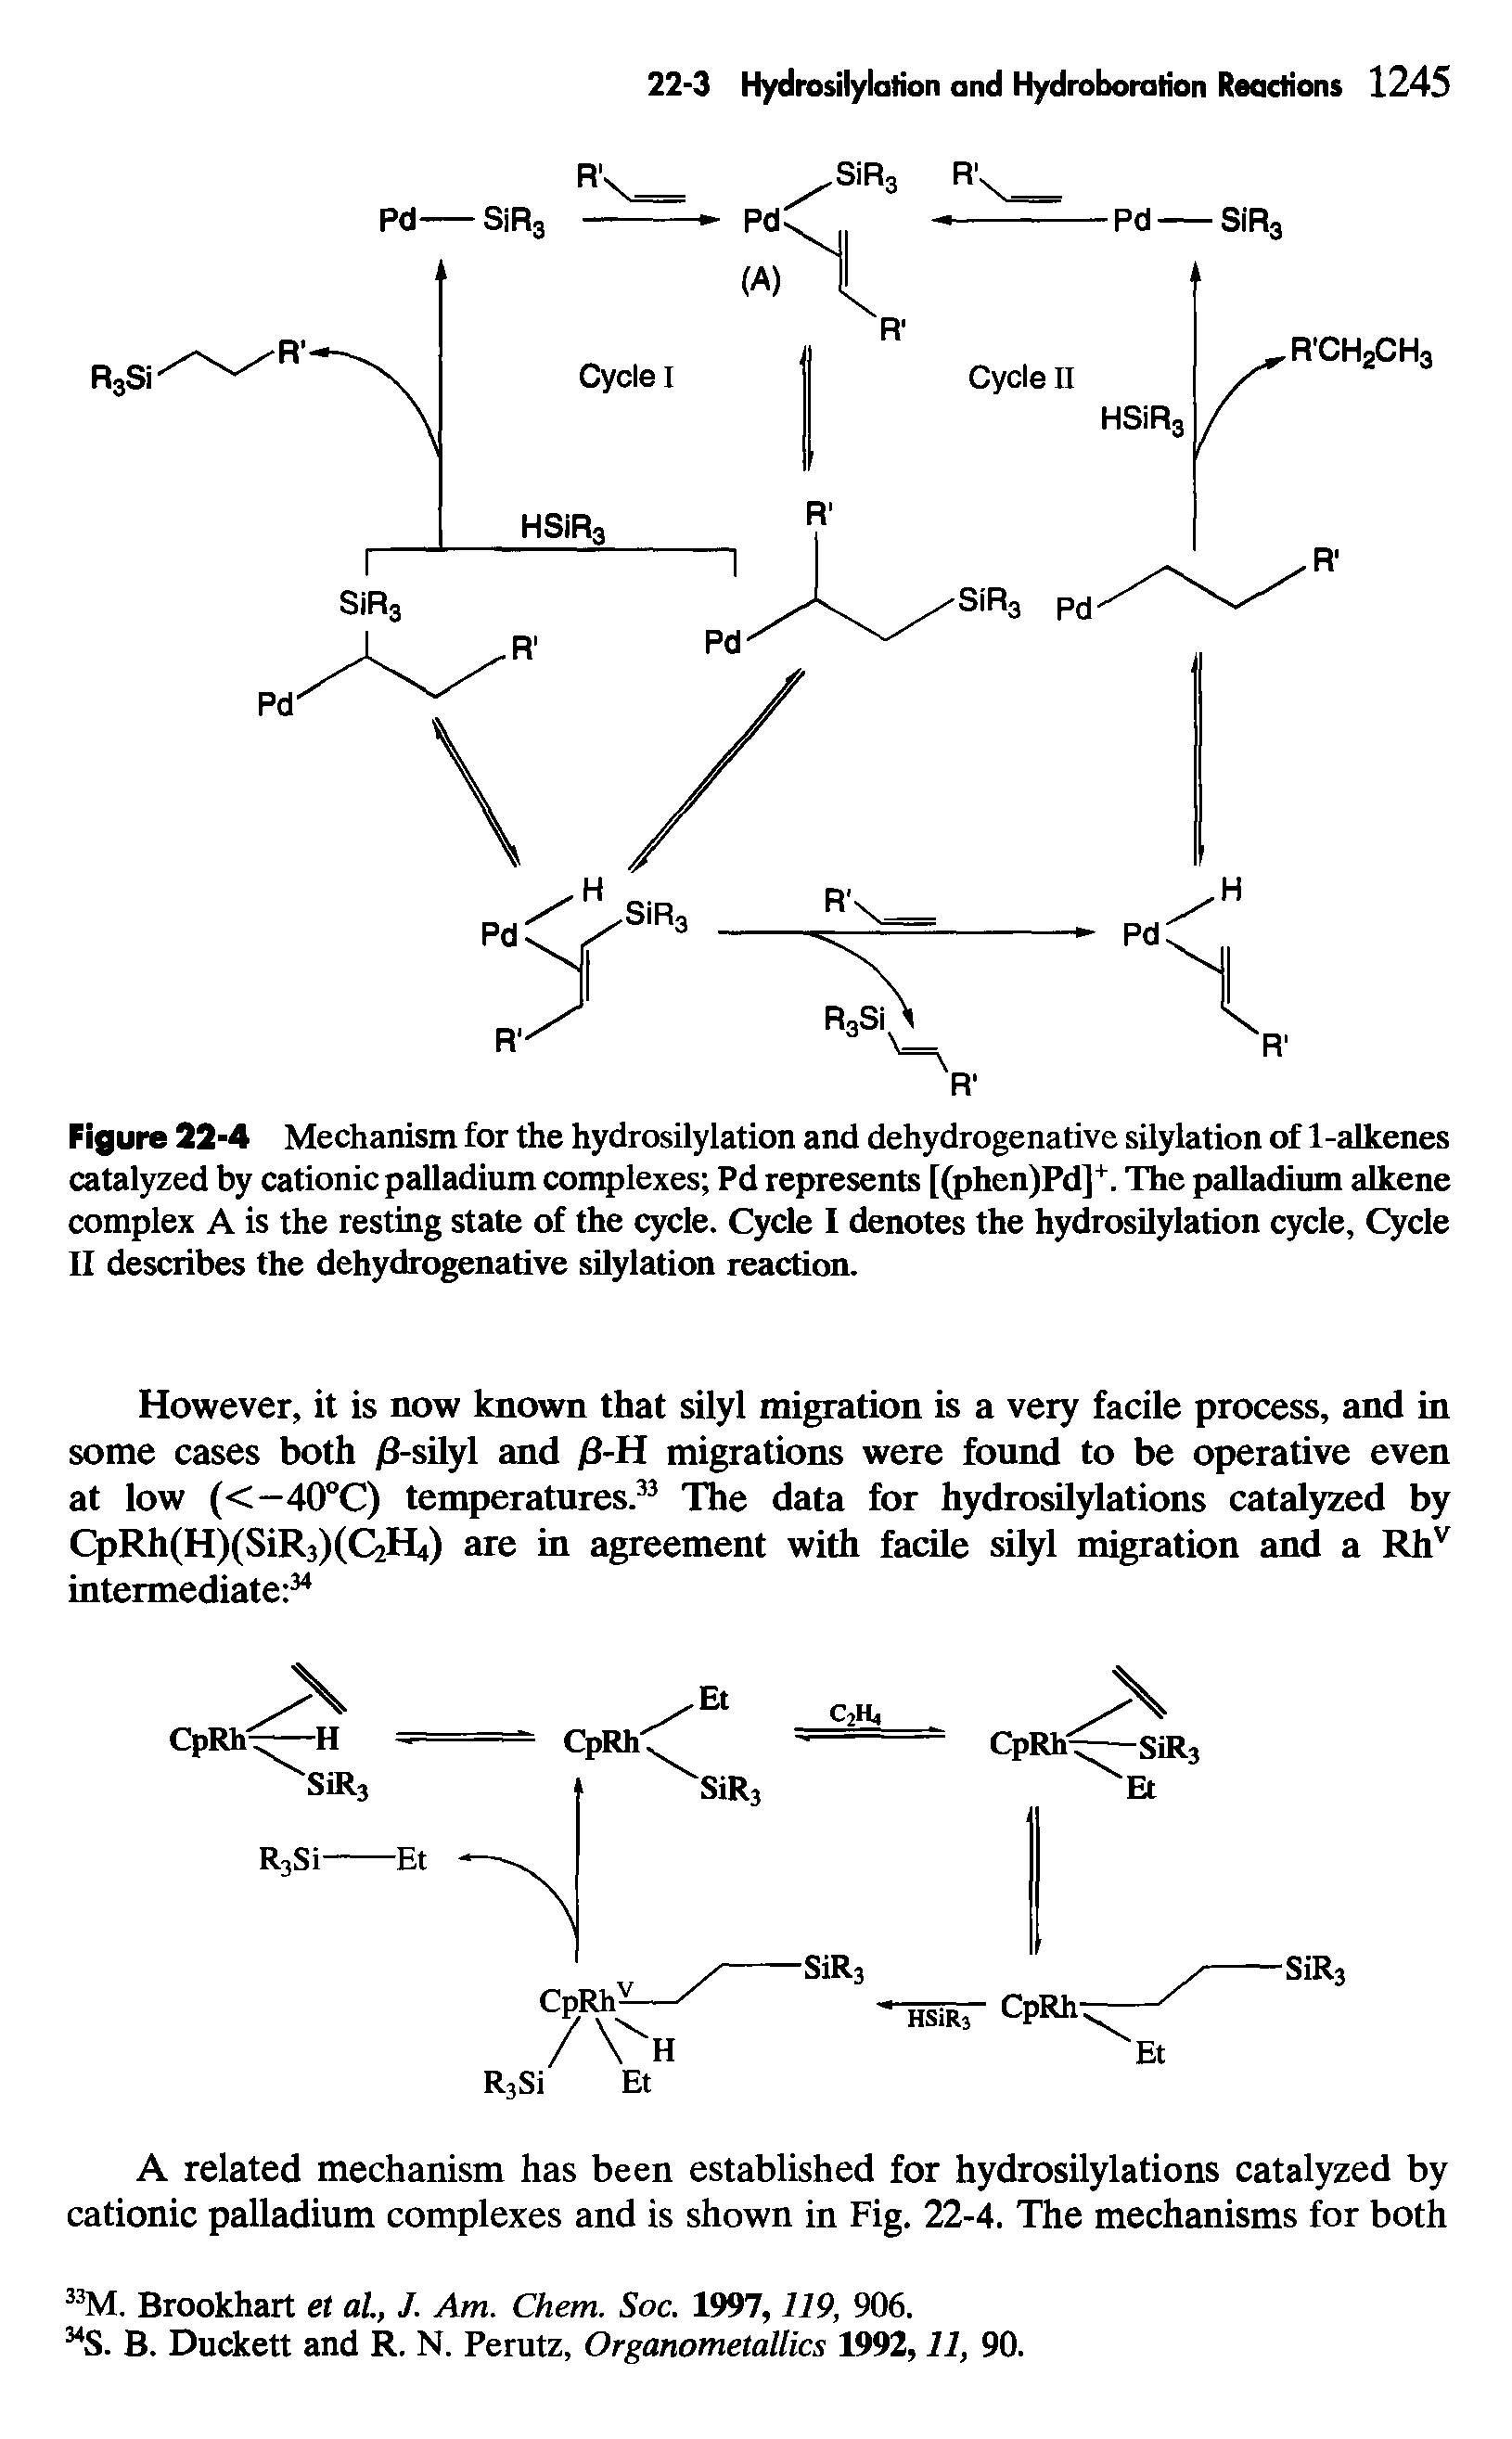 Figure 22-4 Mechanism for the hydrosilylation and dehydrogenative silylation of 1-alkenes catalyzed by cationic palladium complexes Pd represents [(phen)Pd]+. The palladium alkene complex A is the resting state of the cycle. Cycle I denotes the hydrosilylation cycle, Cycle II describes the dehydrogenative silylation reaction.